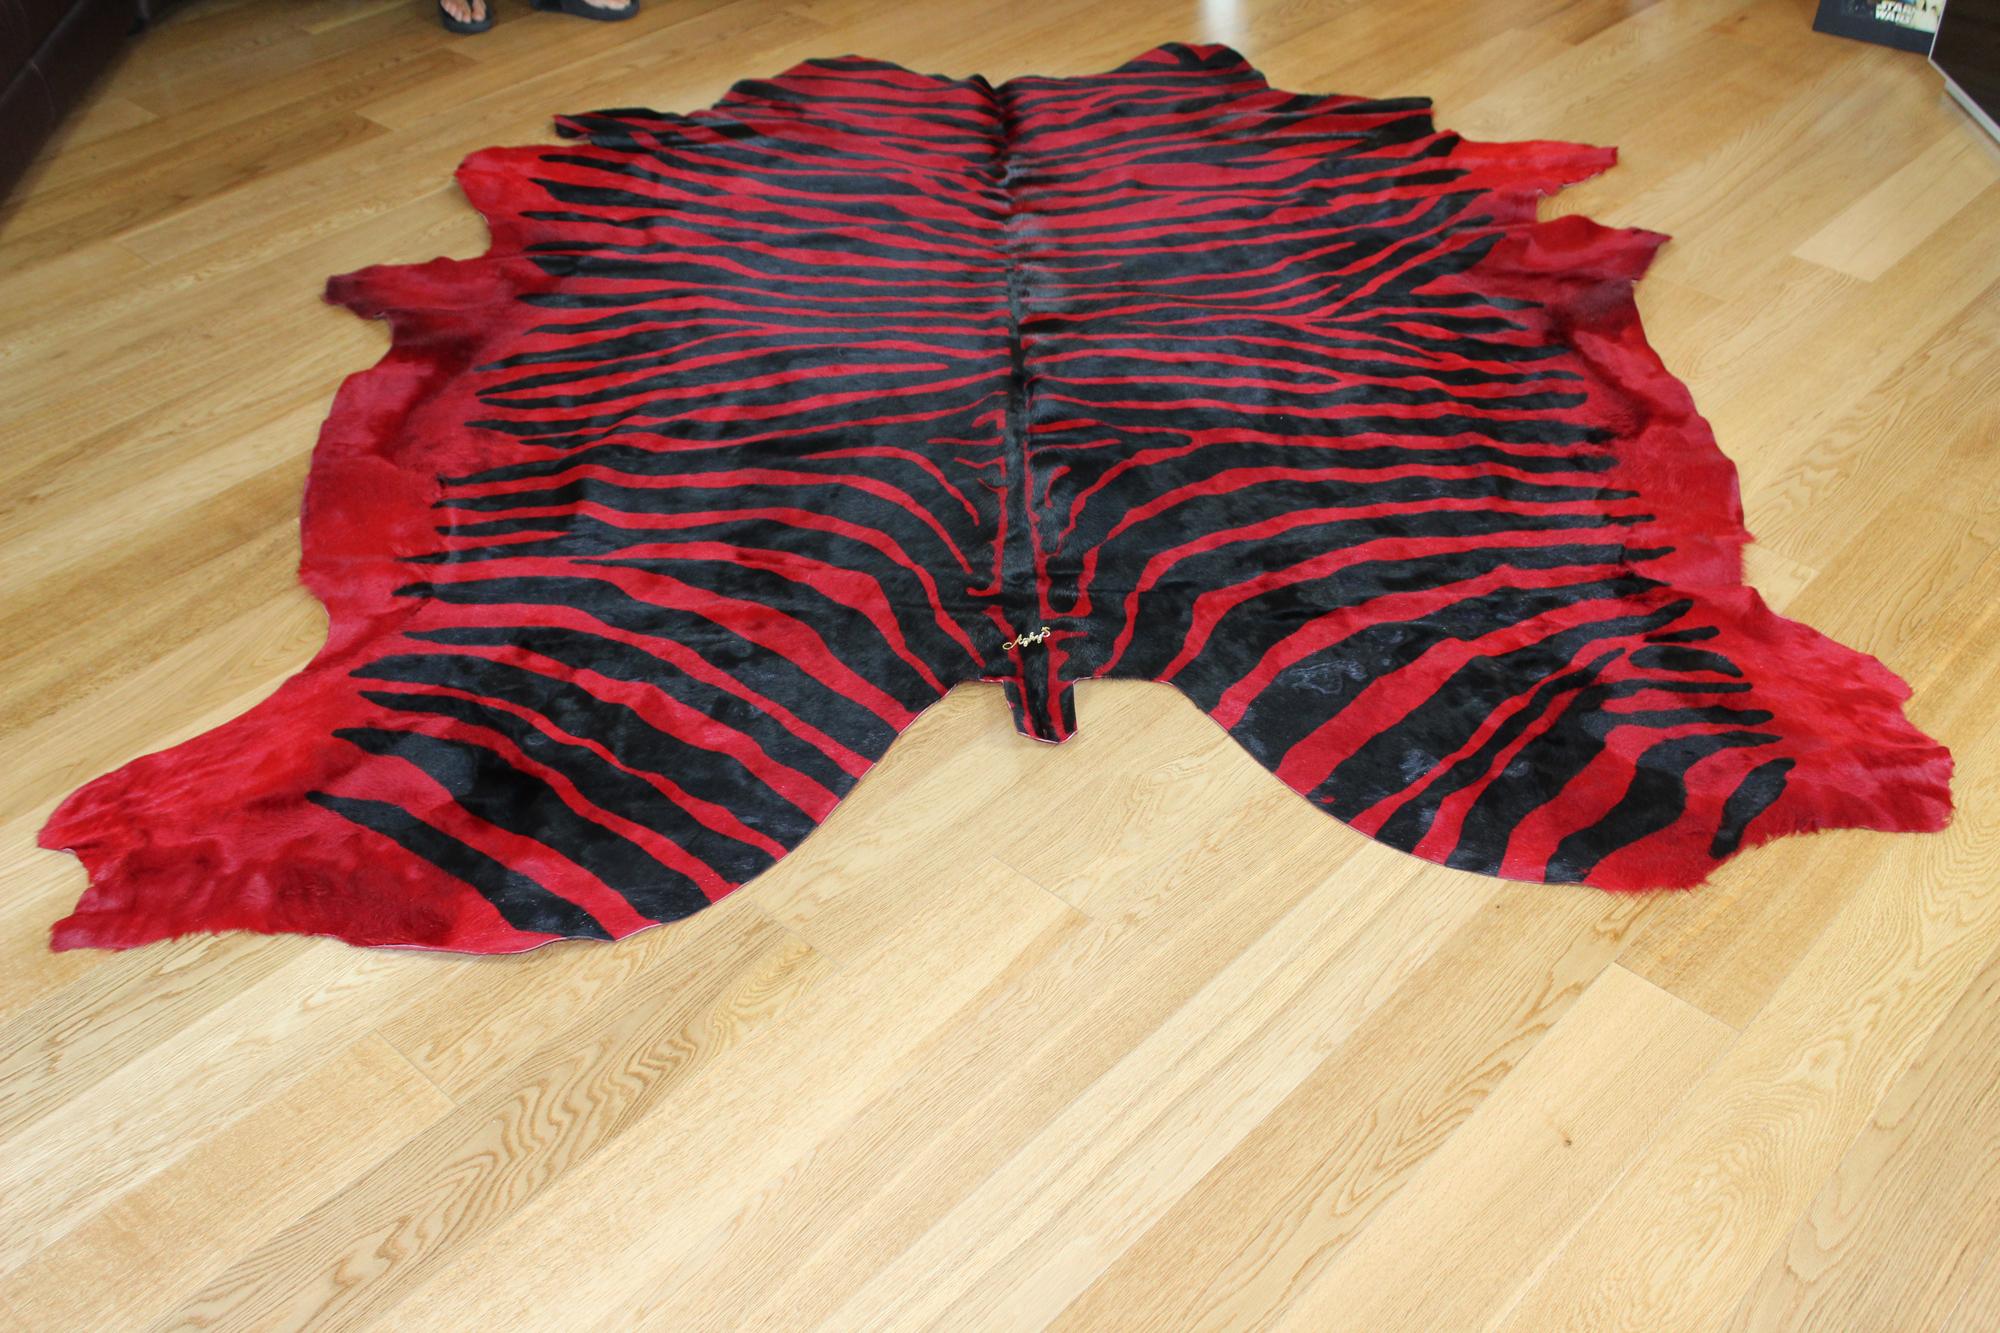 Custom rugs manufactured in Italy.
The item listed is a black and red zebra cow leather rug, ready for shipment.
Size: 5,20mq

Custom orders ready for shipment in 10 days.